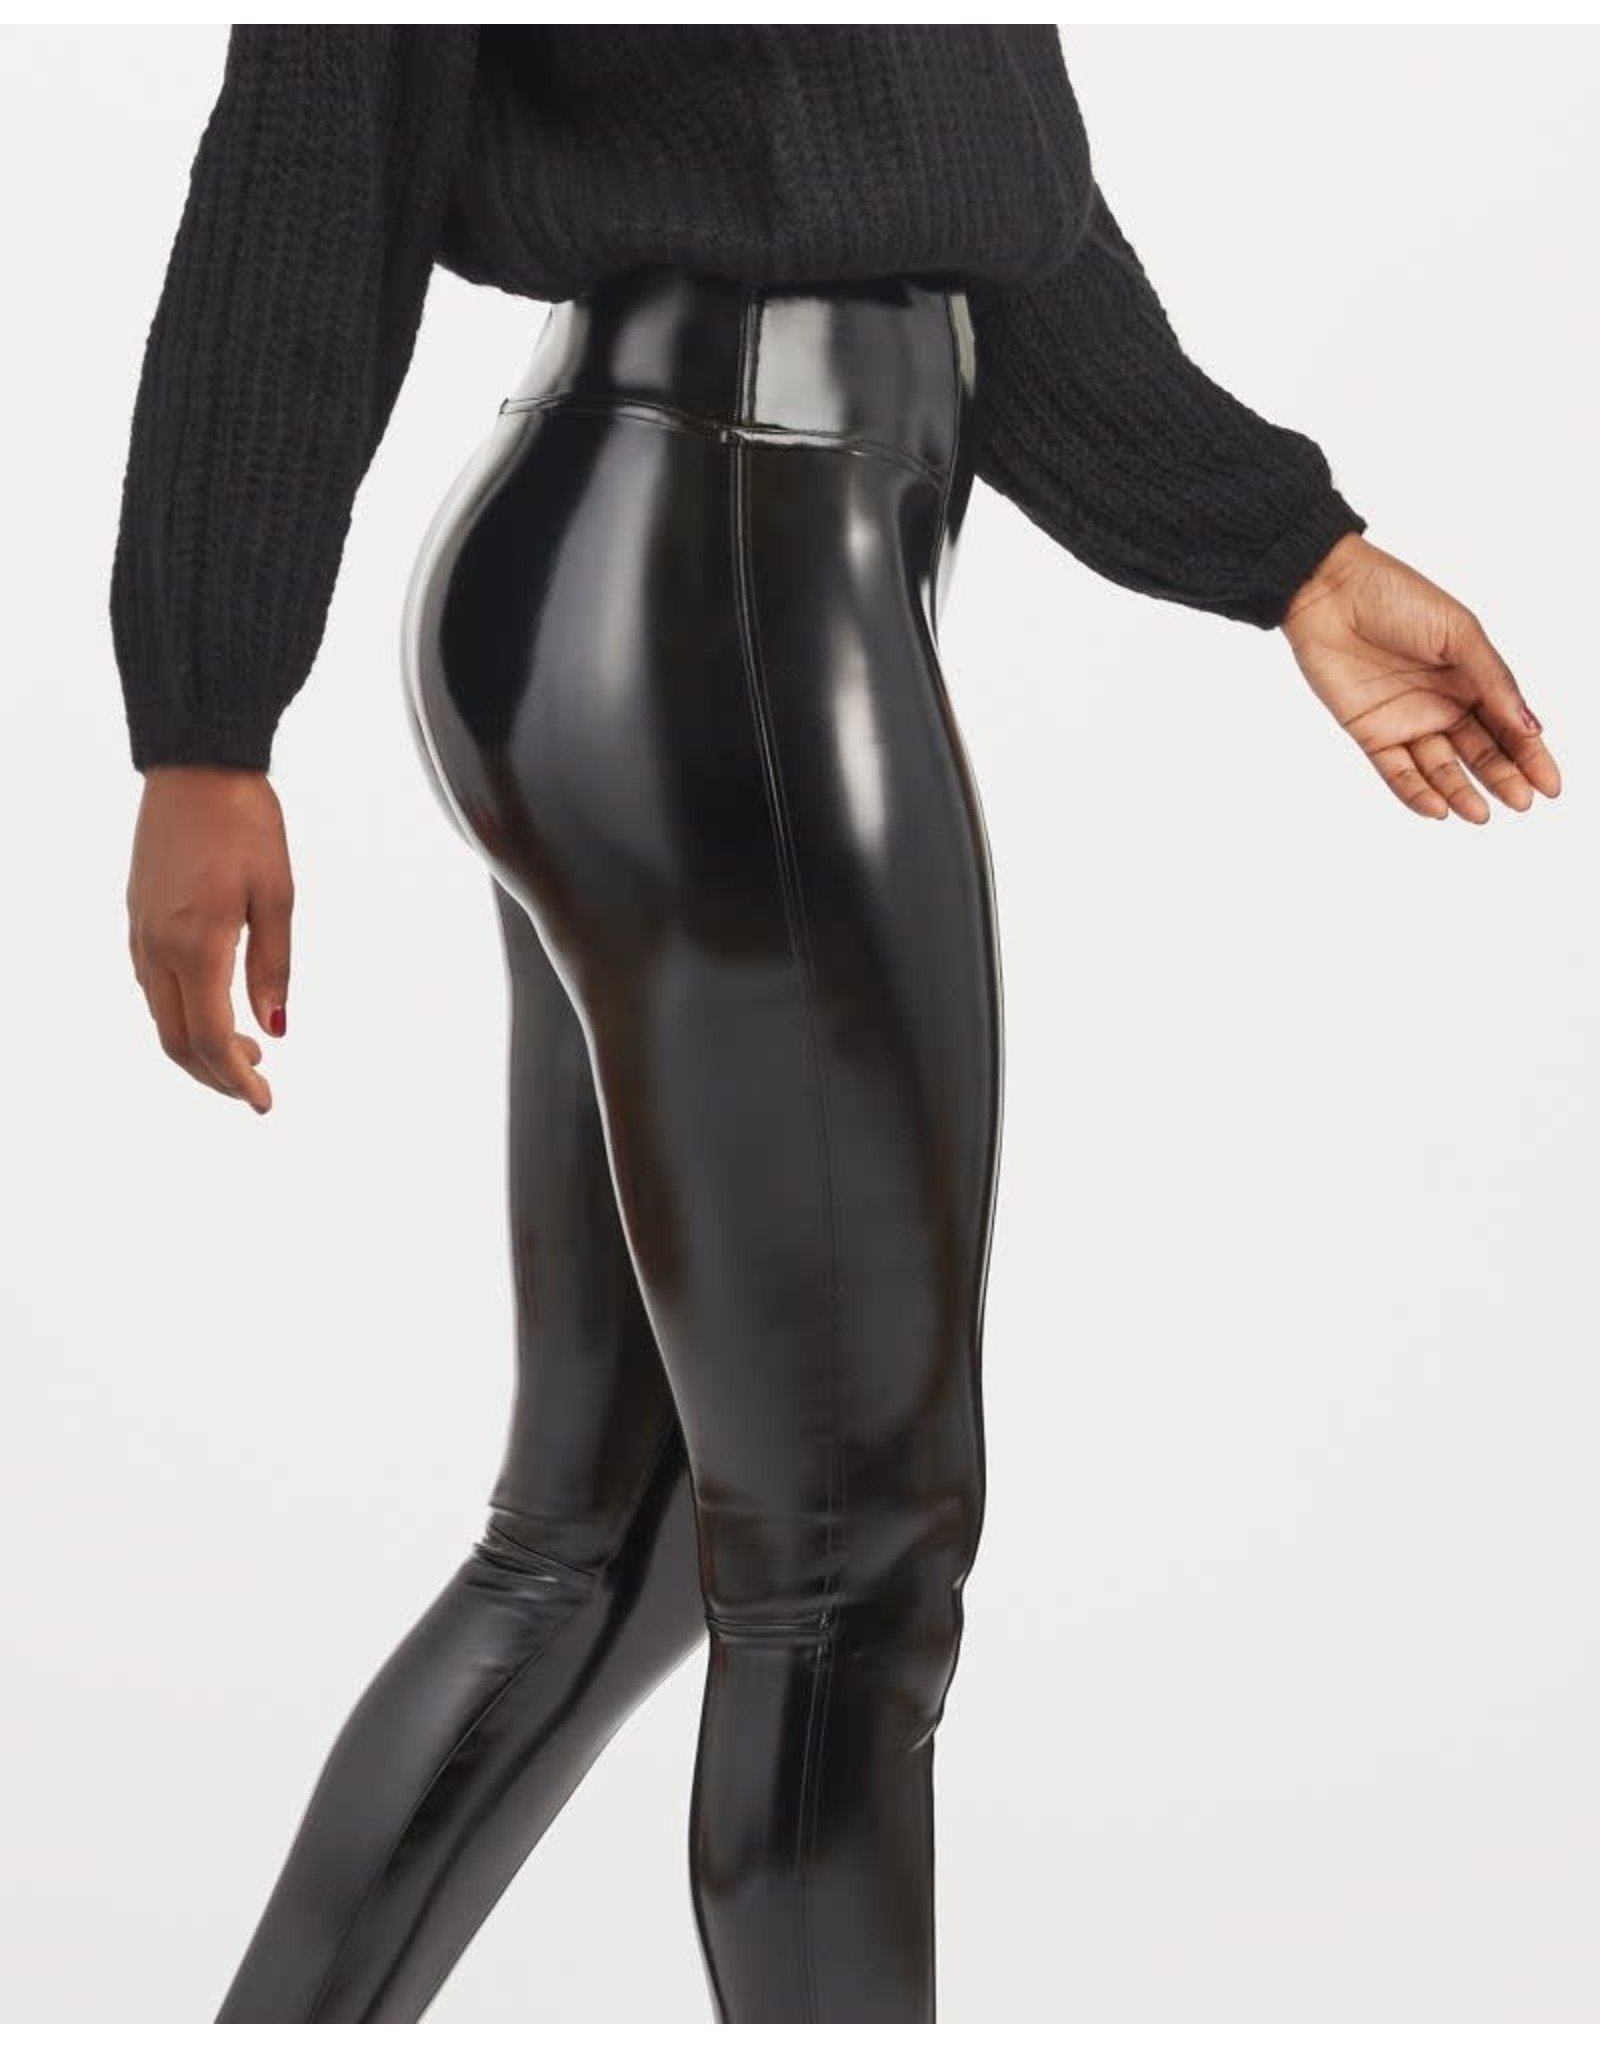 NEW FAUX LEATHER LEGGINGS FROM SPANX now with fleece lining. Use TA